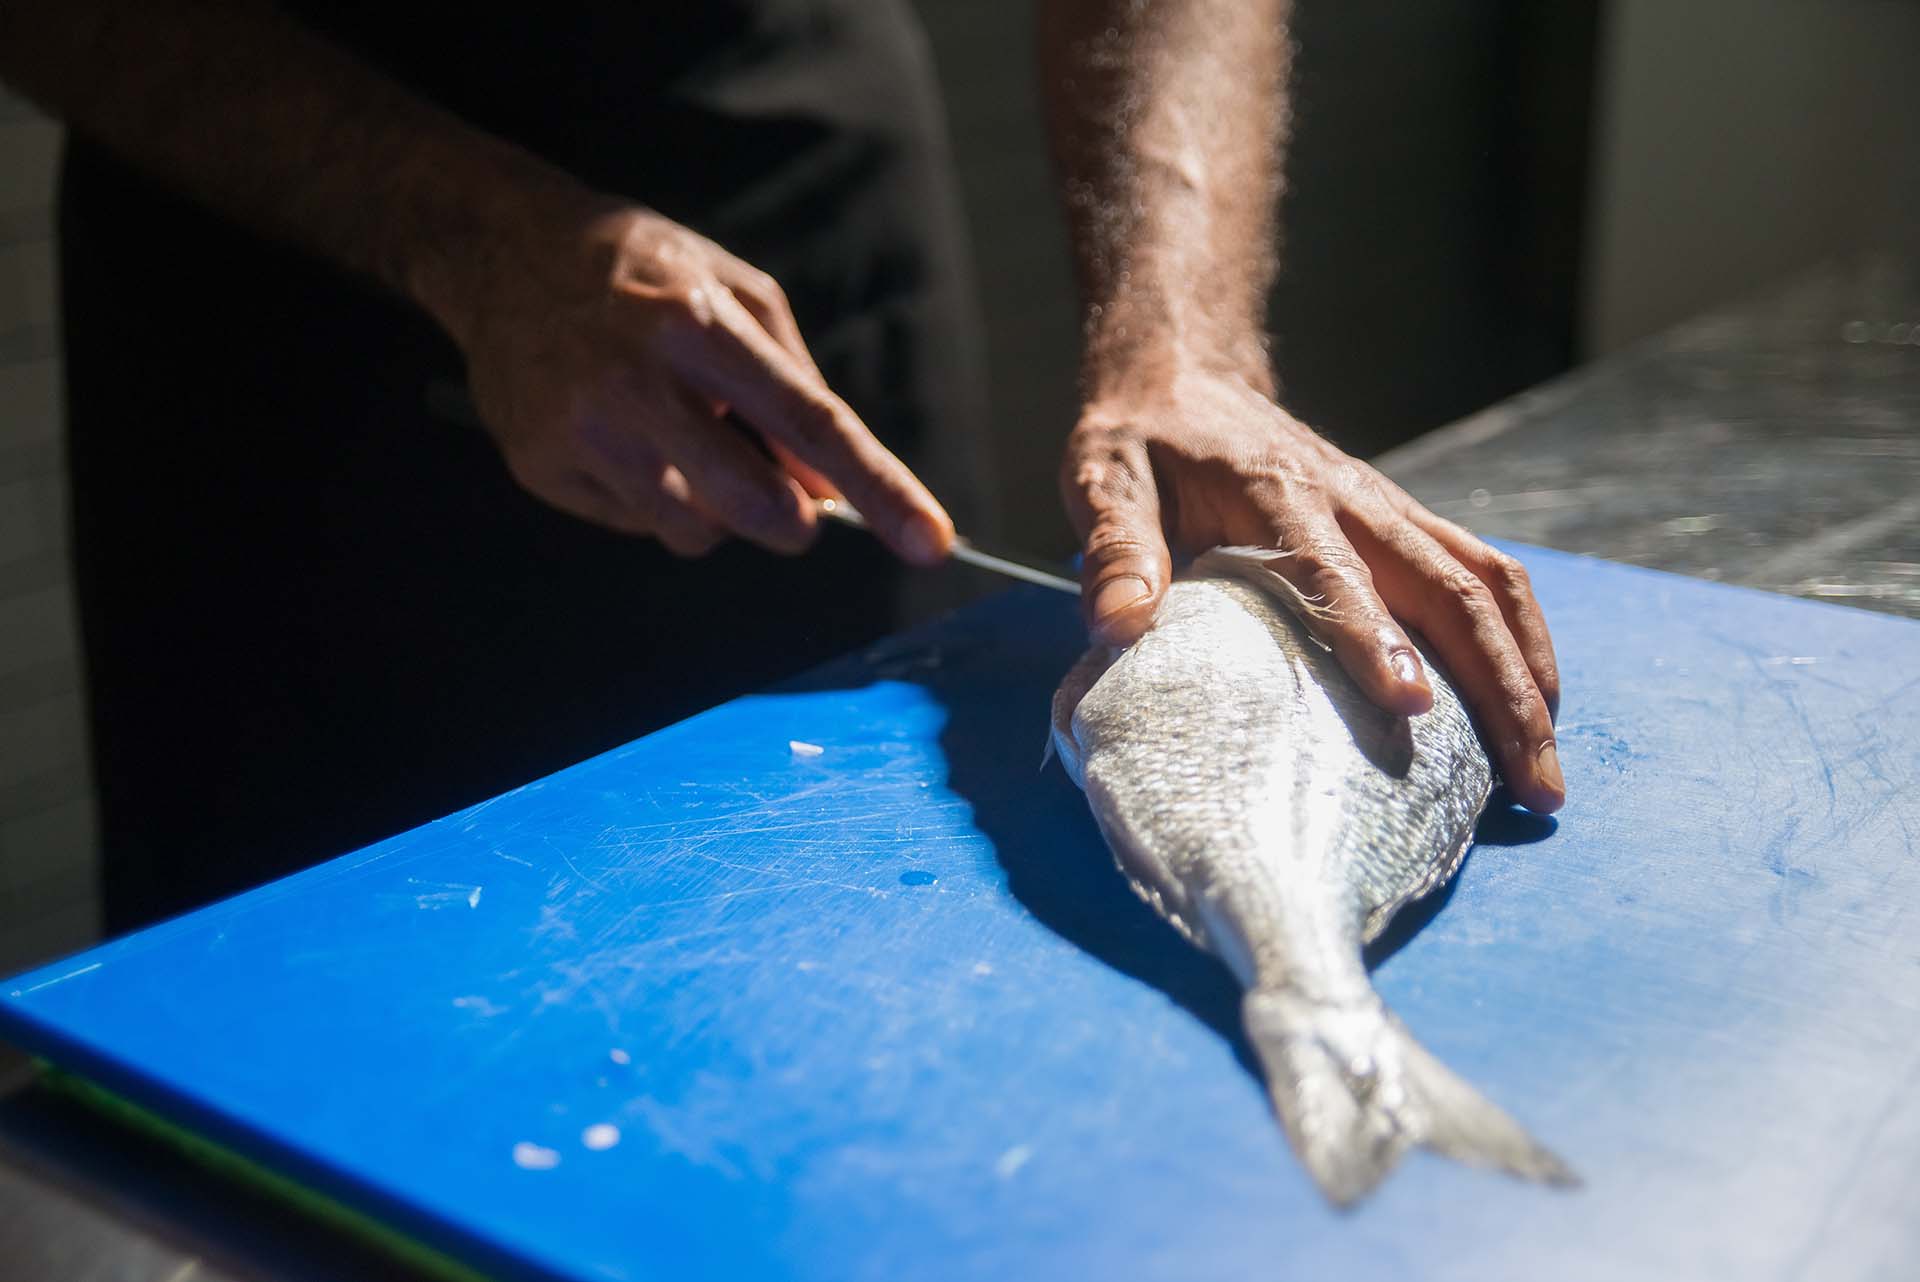 A person gutting the fish